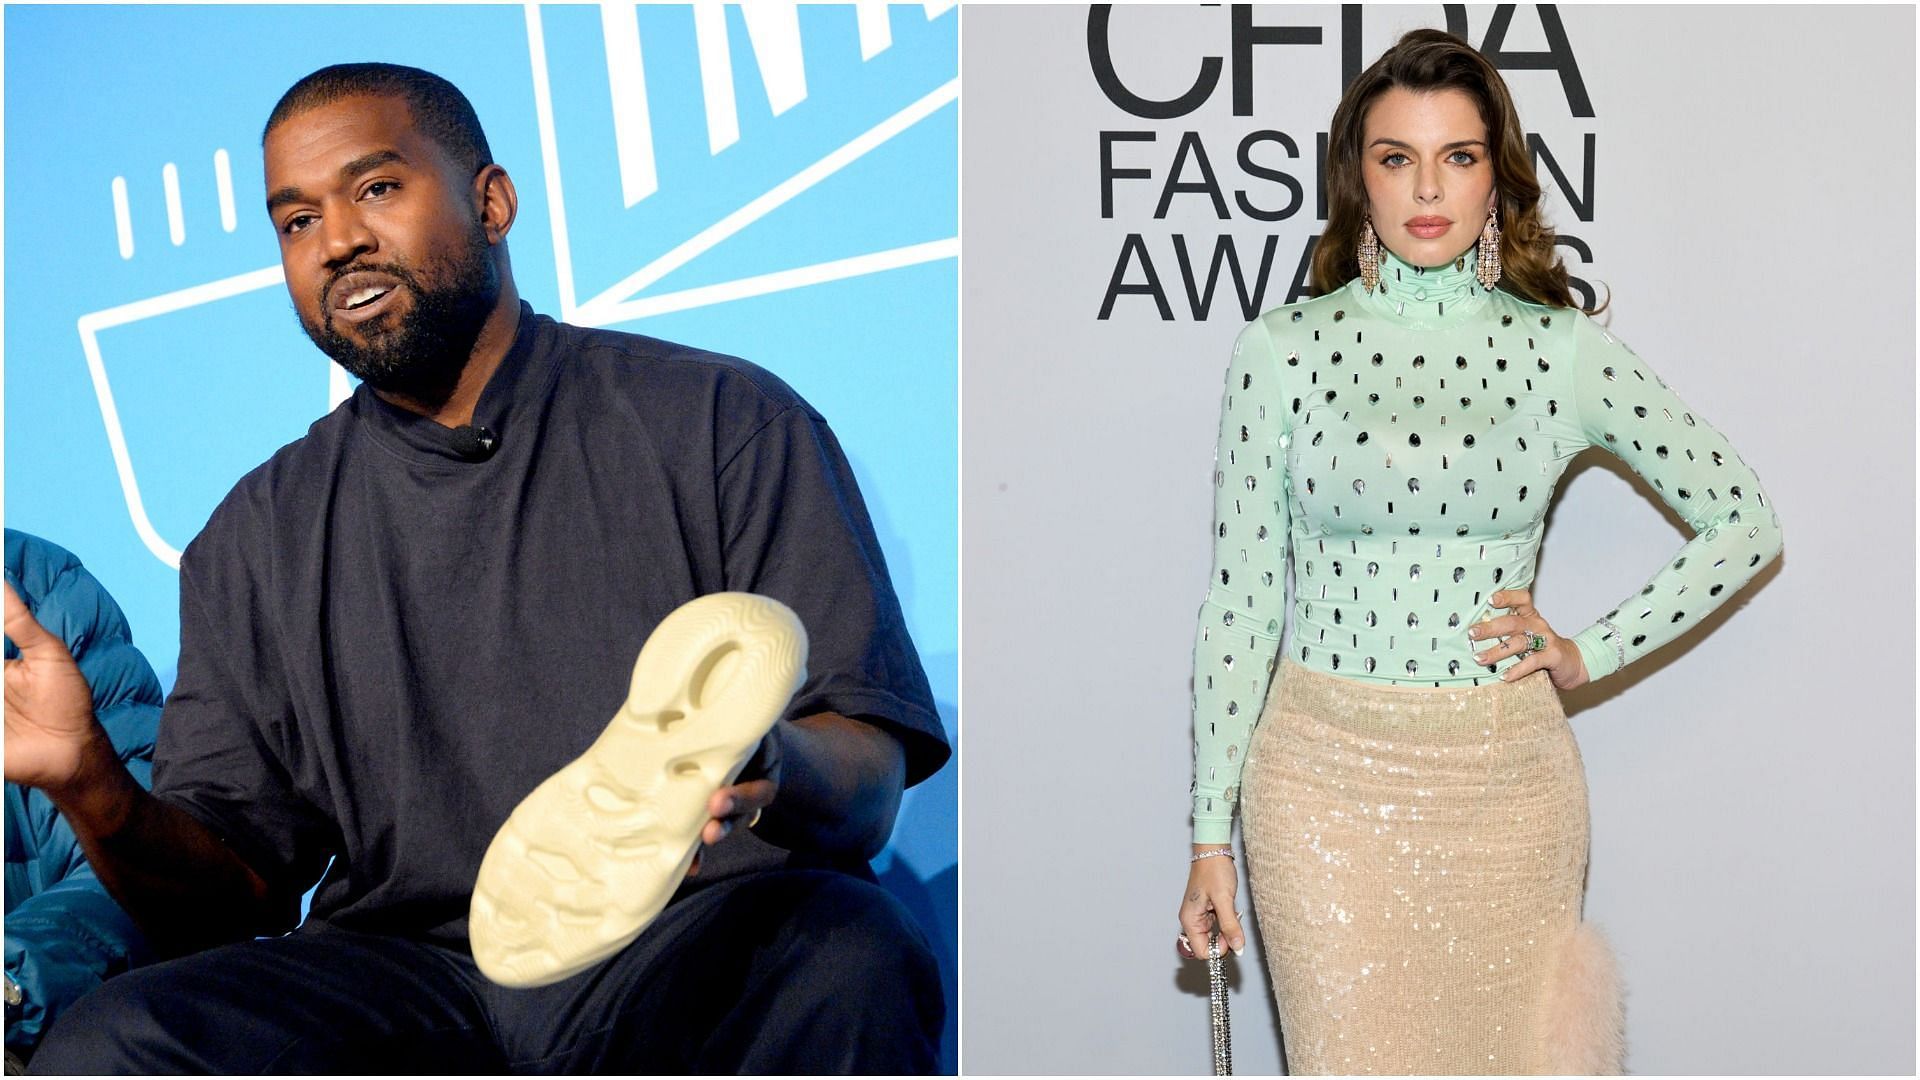 Kanye West and Julia Fox enjoyed a date together (Images via Brad Barket and Jamie McCarthy/Getty Images)